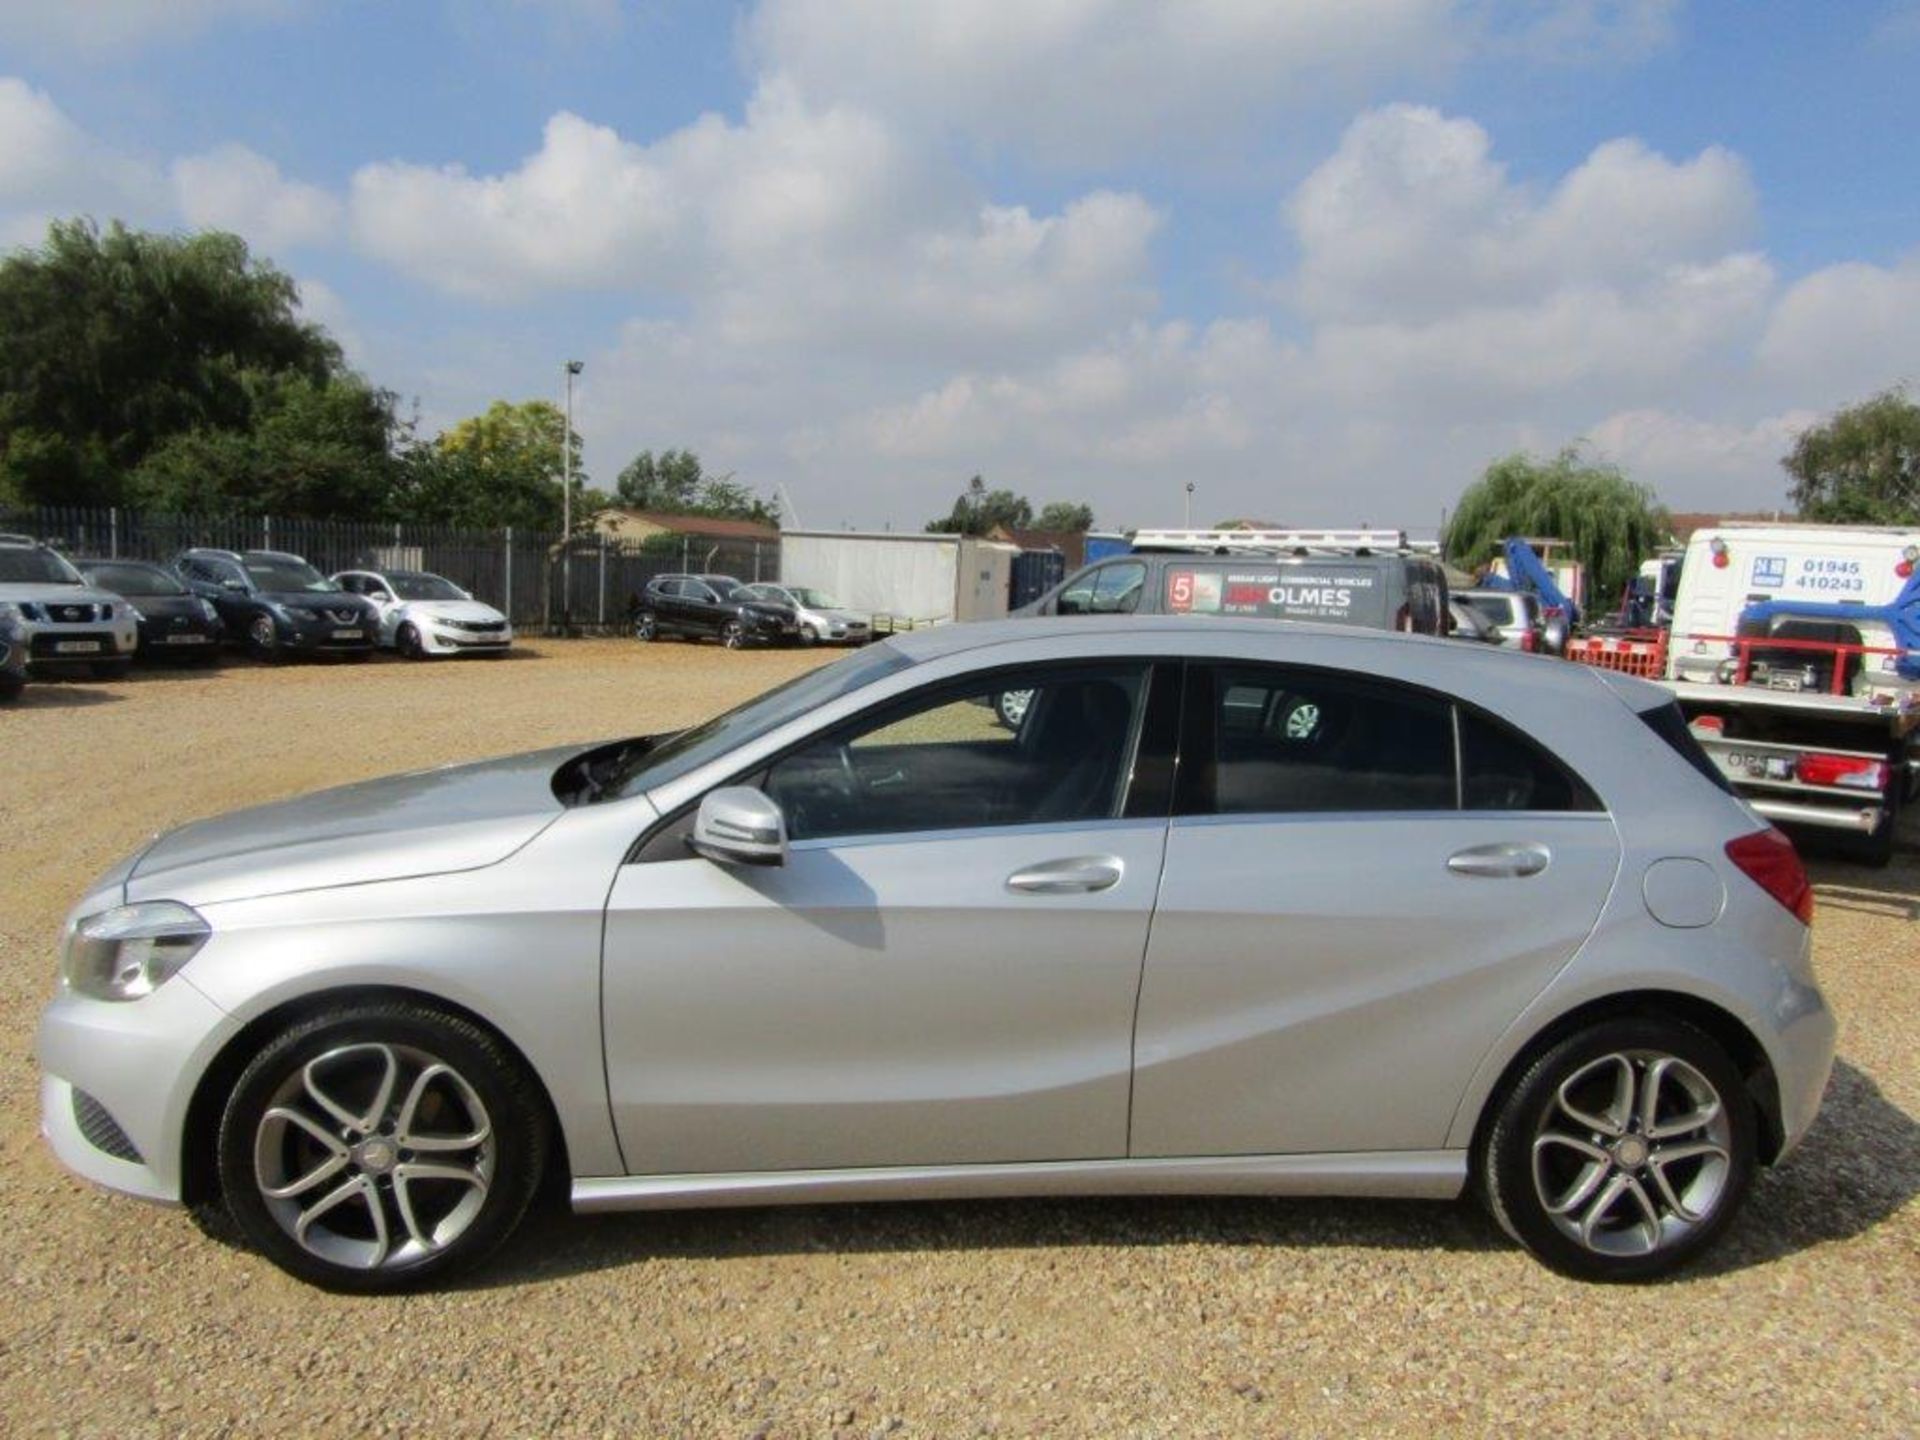 65 15 Mercedes A200 Sport CDI - Image 2 of 22